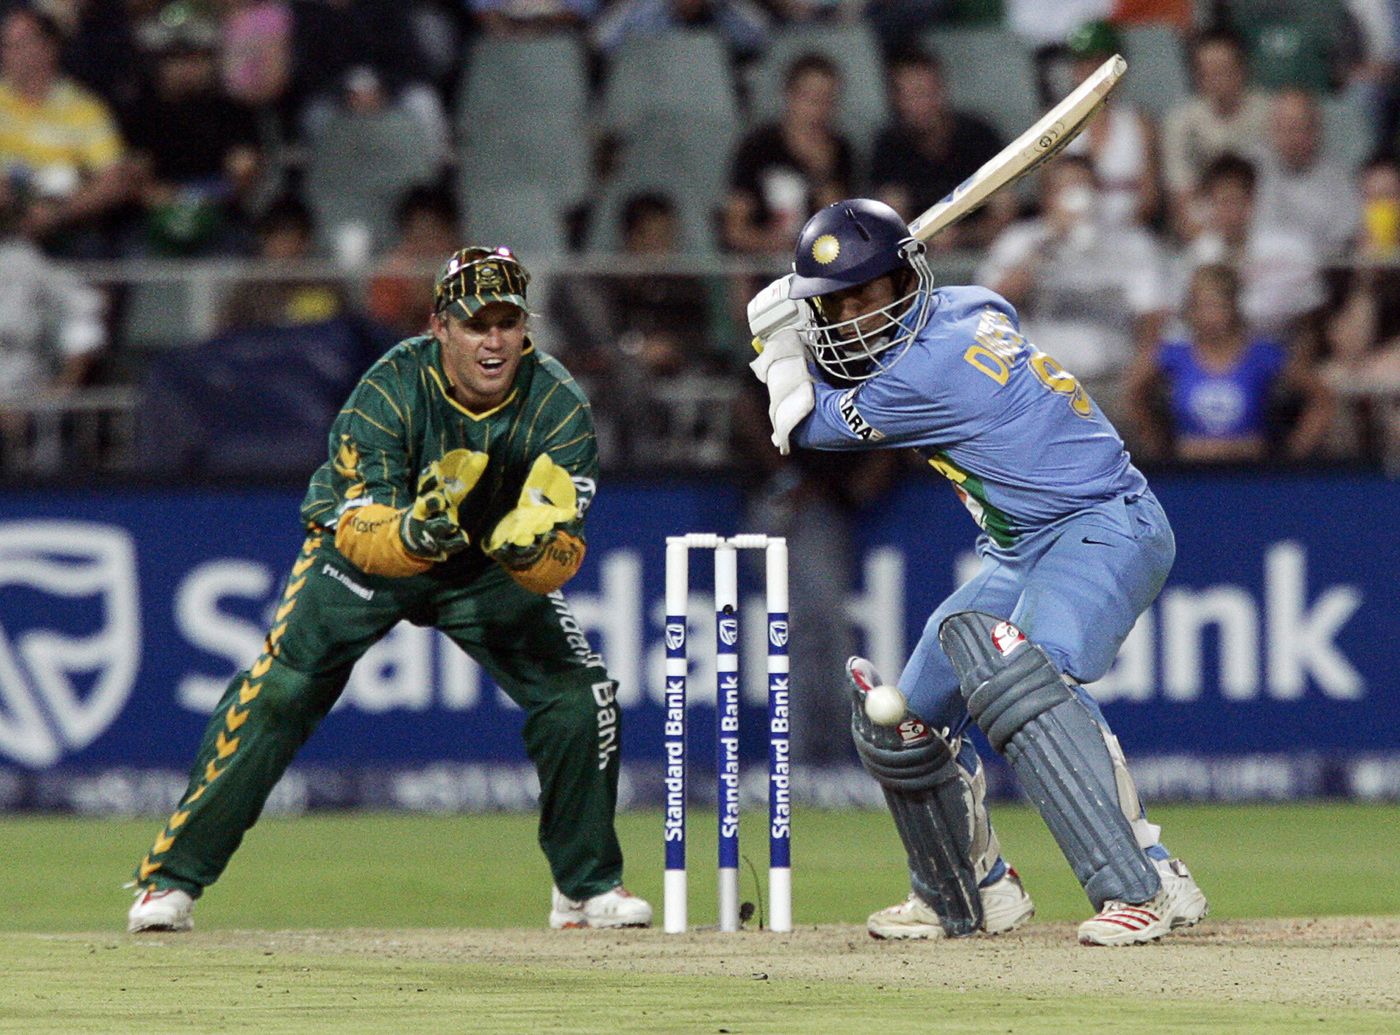 Against whom did team India play the first T20 match? Find out what was the result